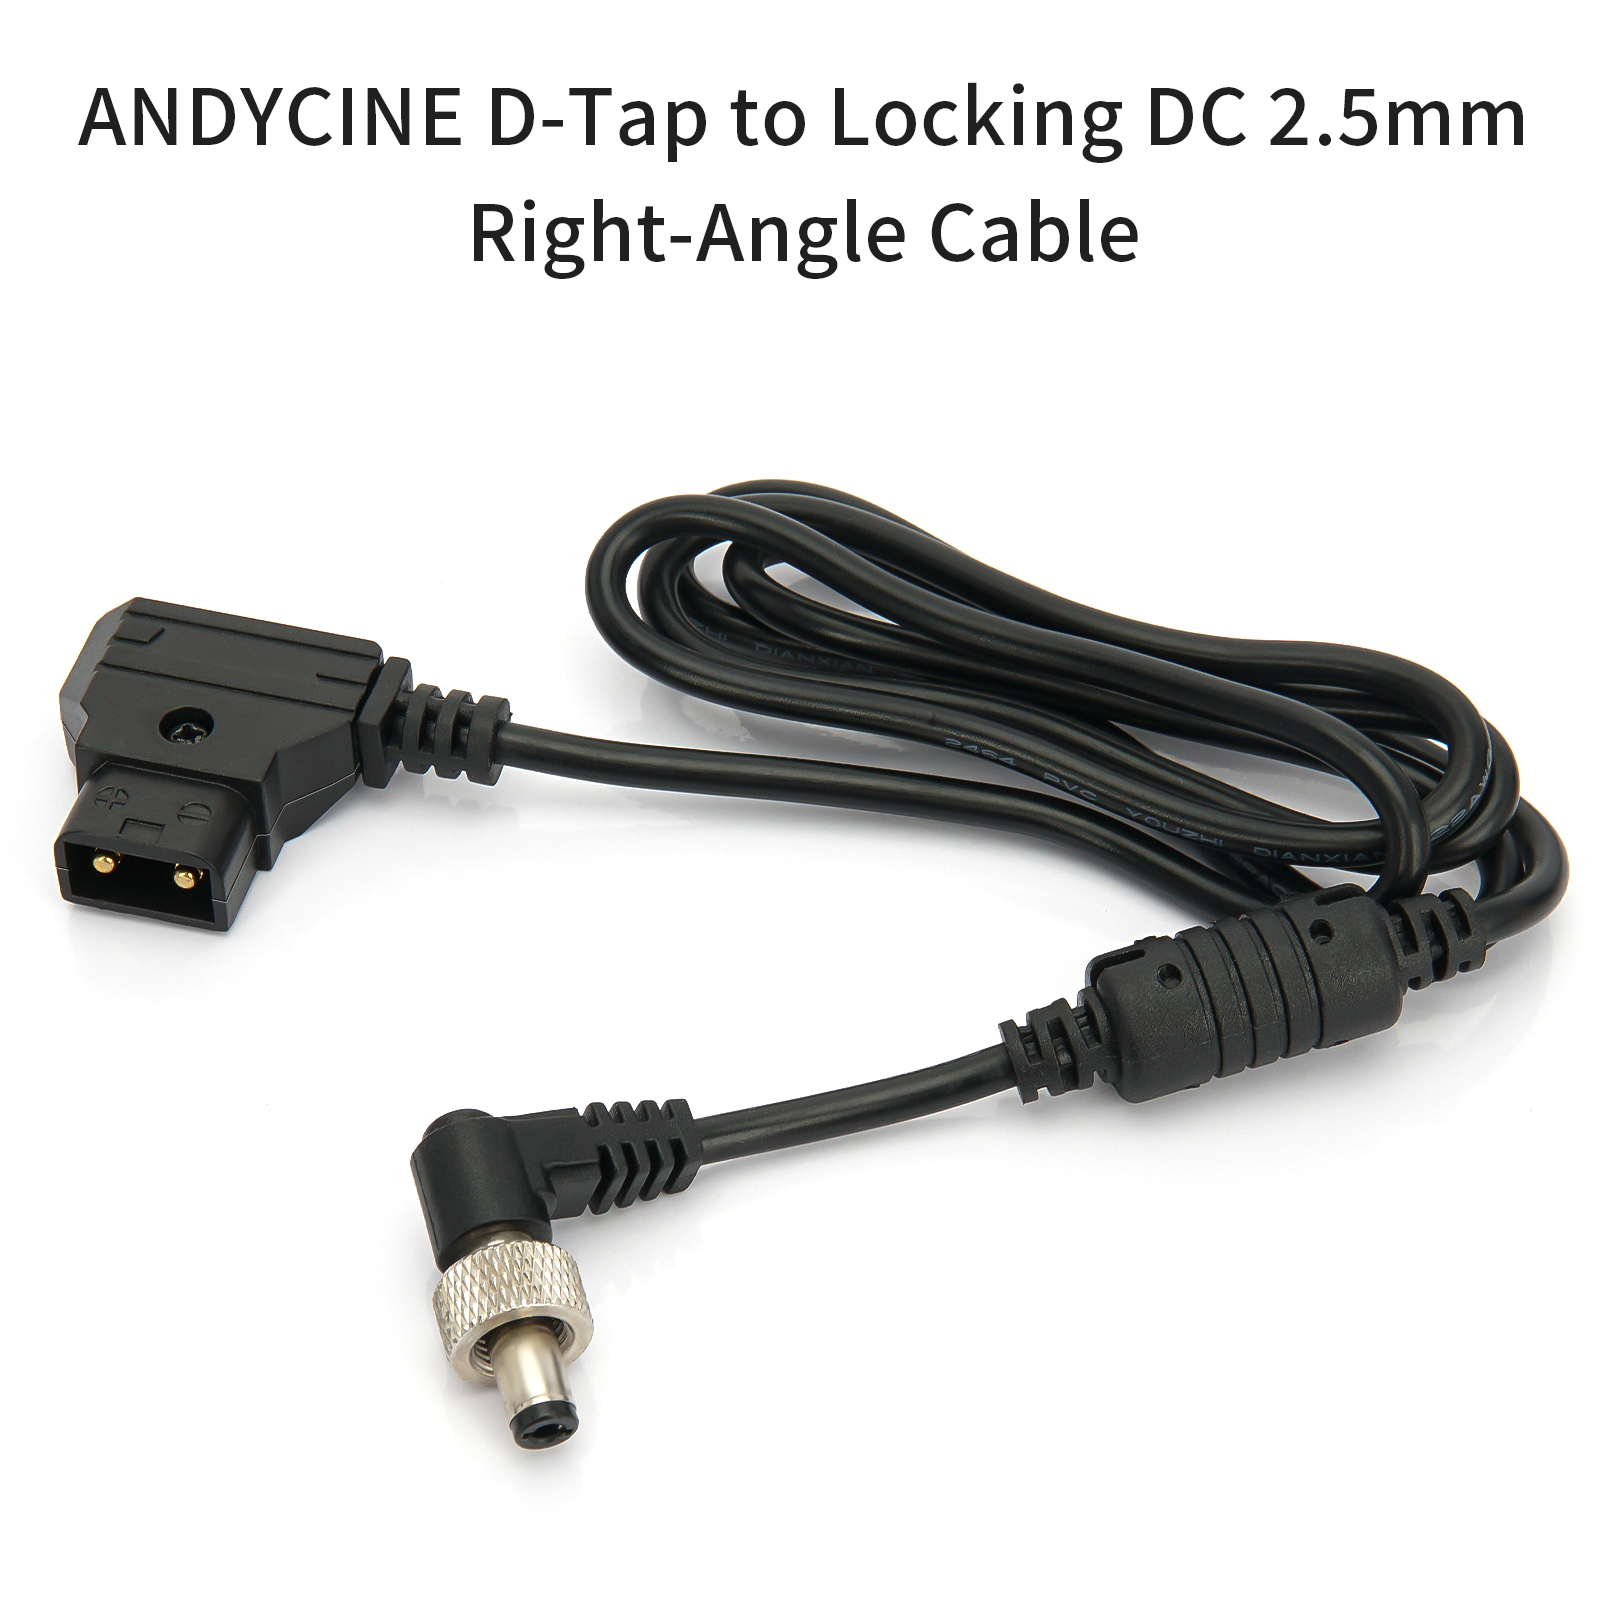 ANDYCINE D-Tap to Locking DC 2.5mm Right-Angle Cable